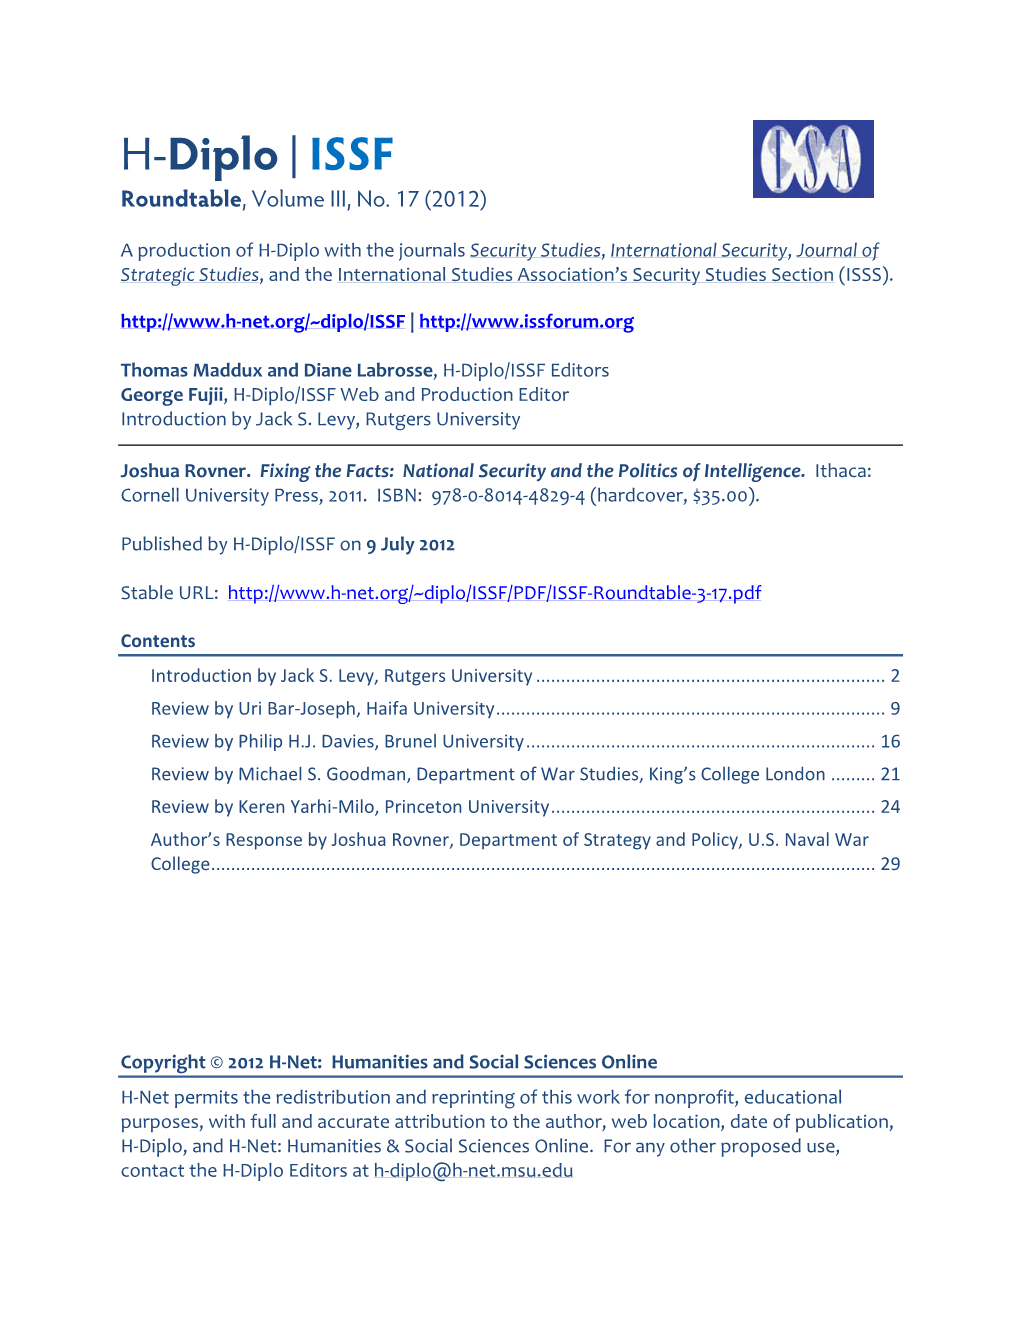 H-Diplo/ISSF Roundtable, Vol. 3, No. 16 (2012)